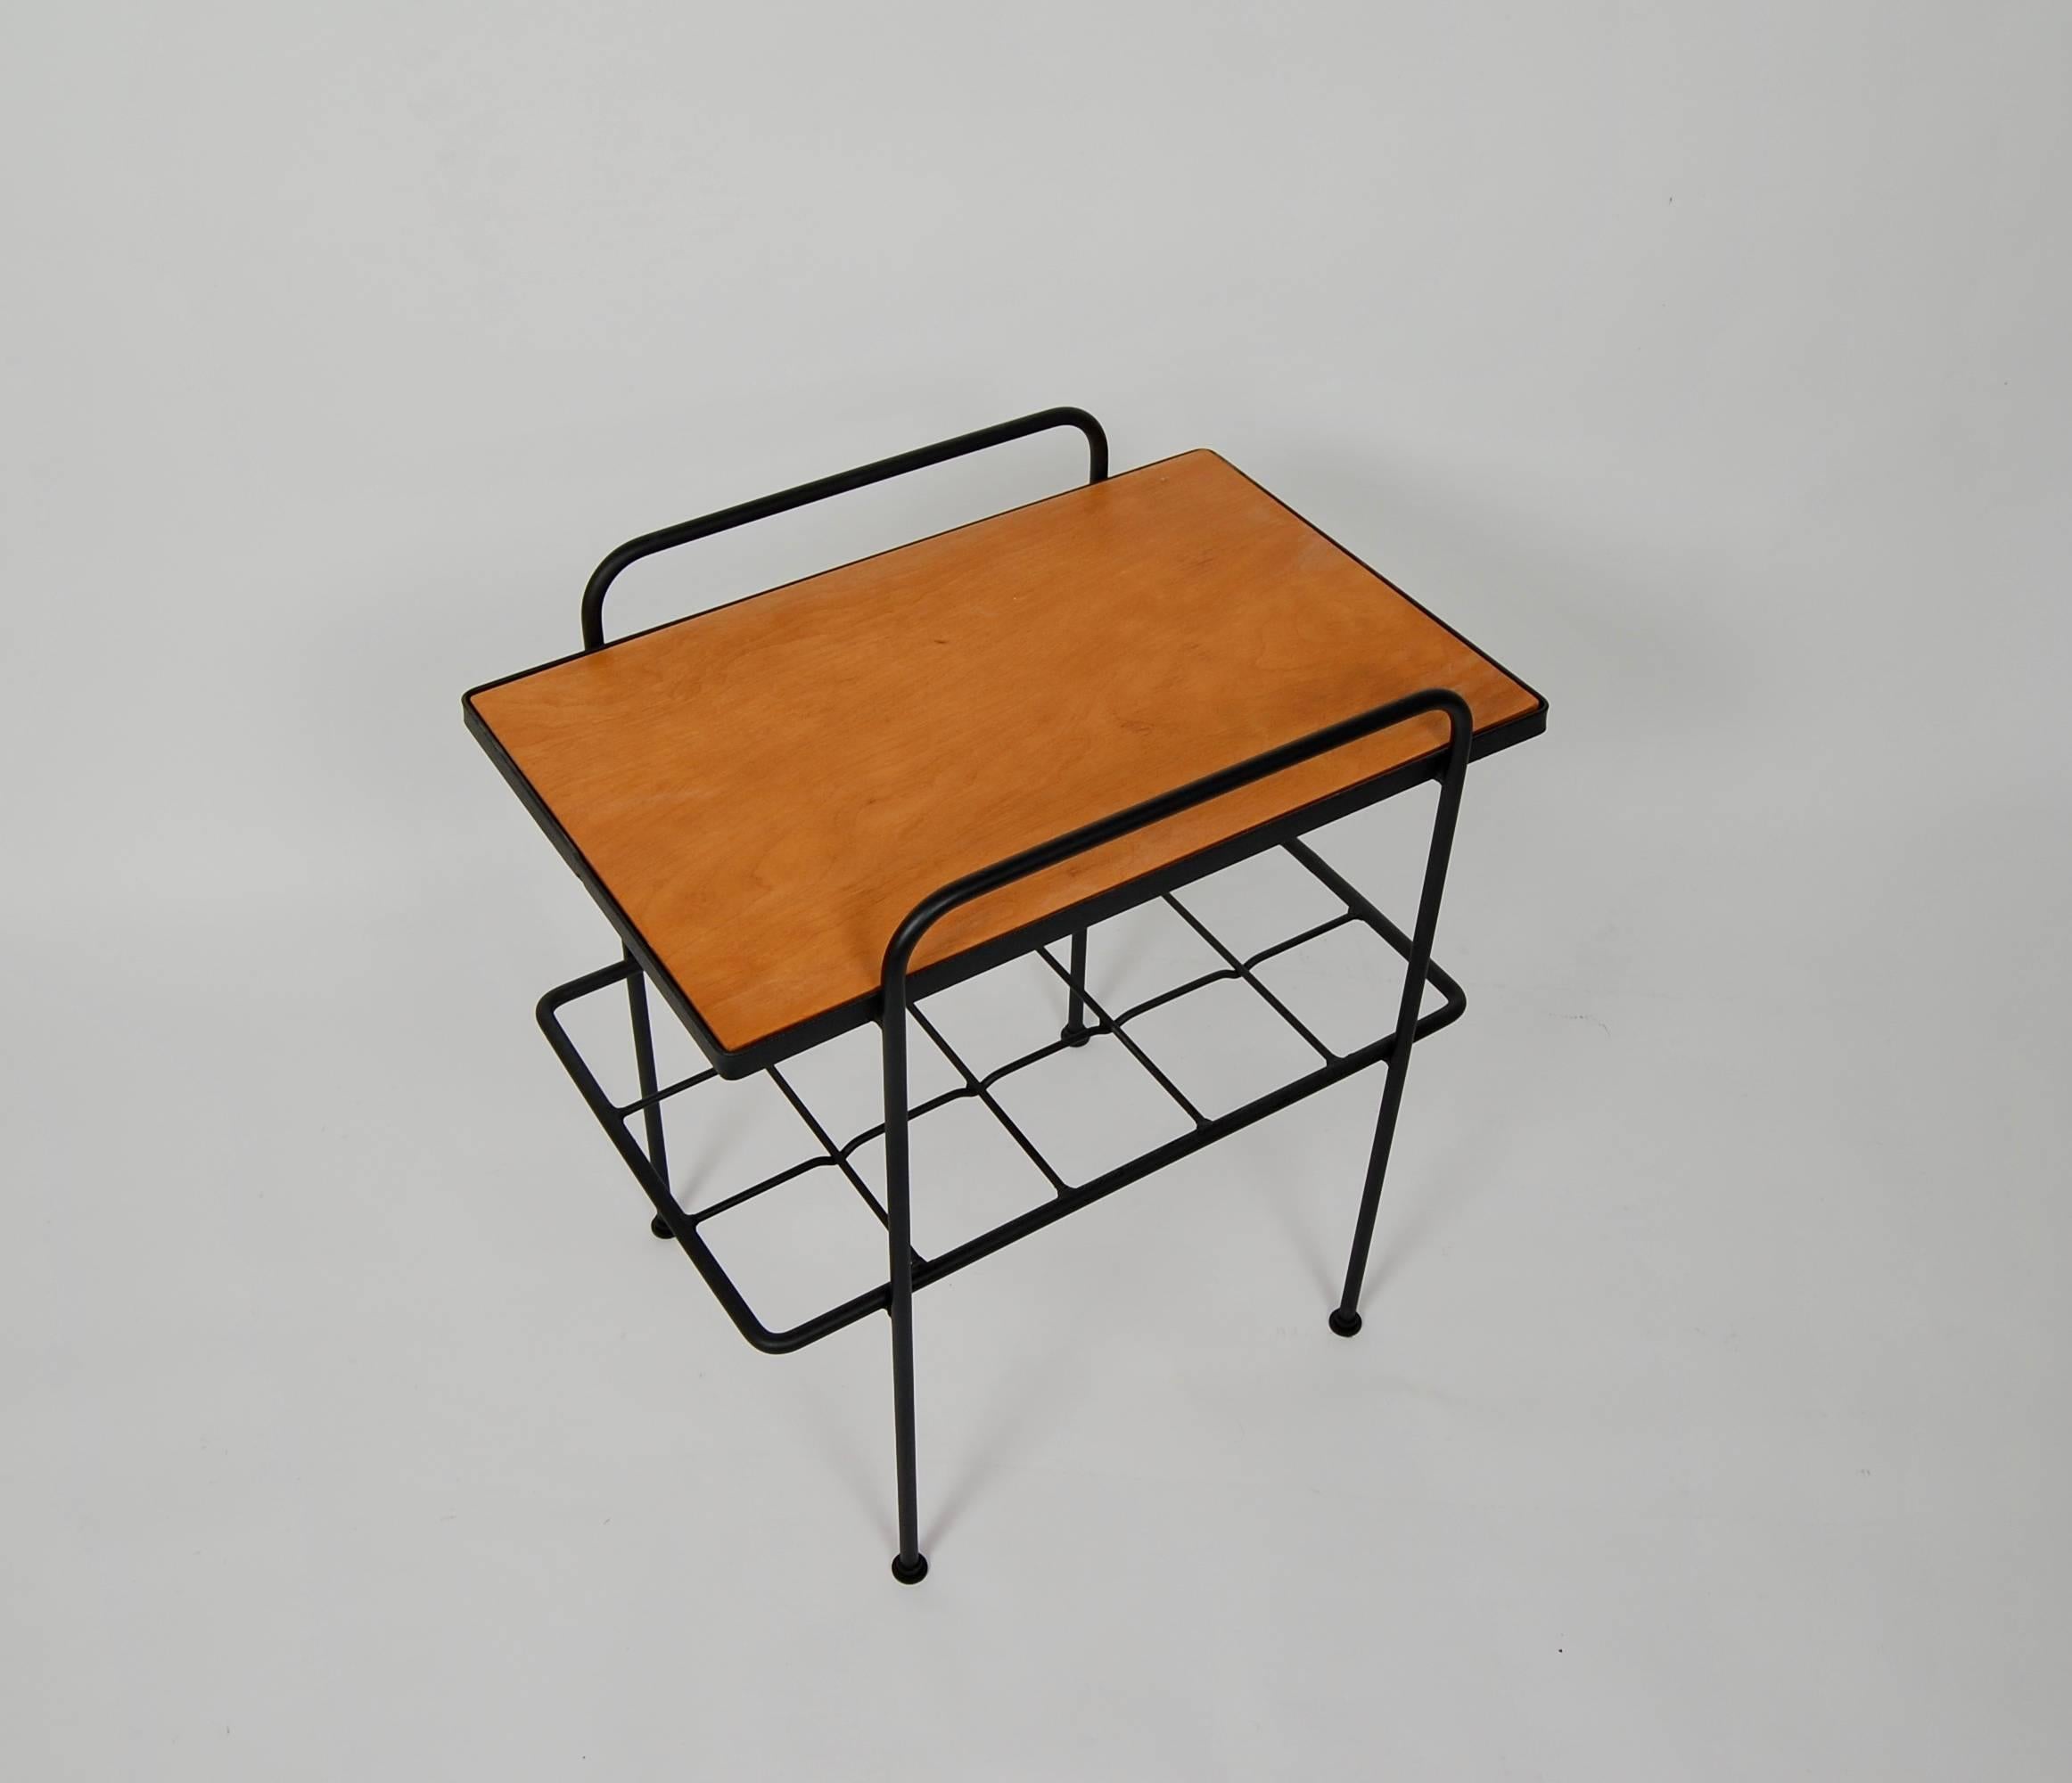 Lacquered Early 1905s California Mid-Century Modern Iron and Wood End Table by Inco